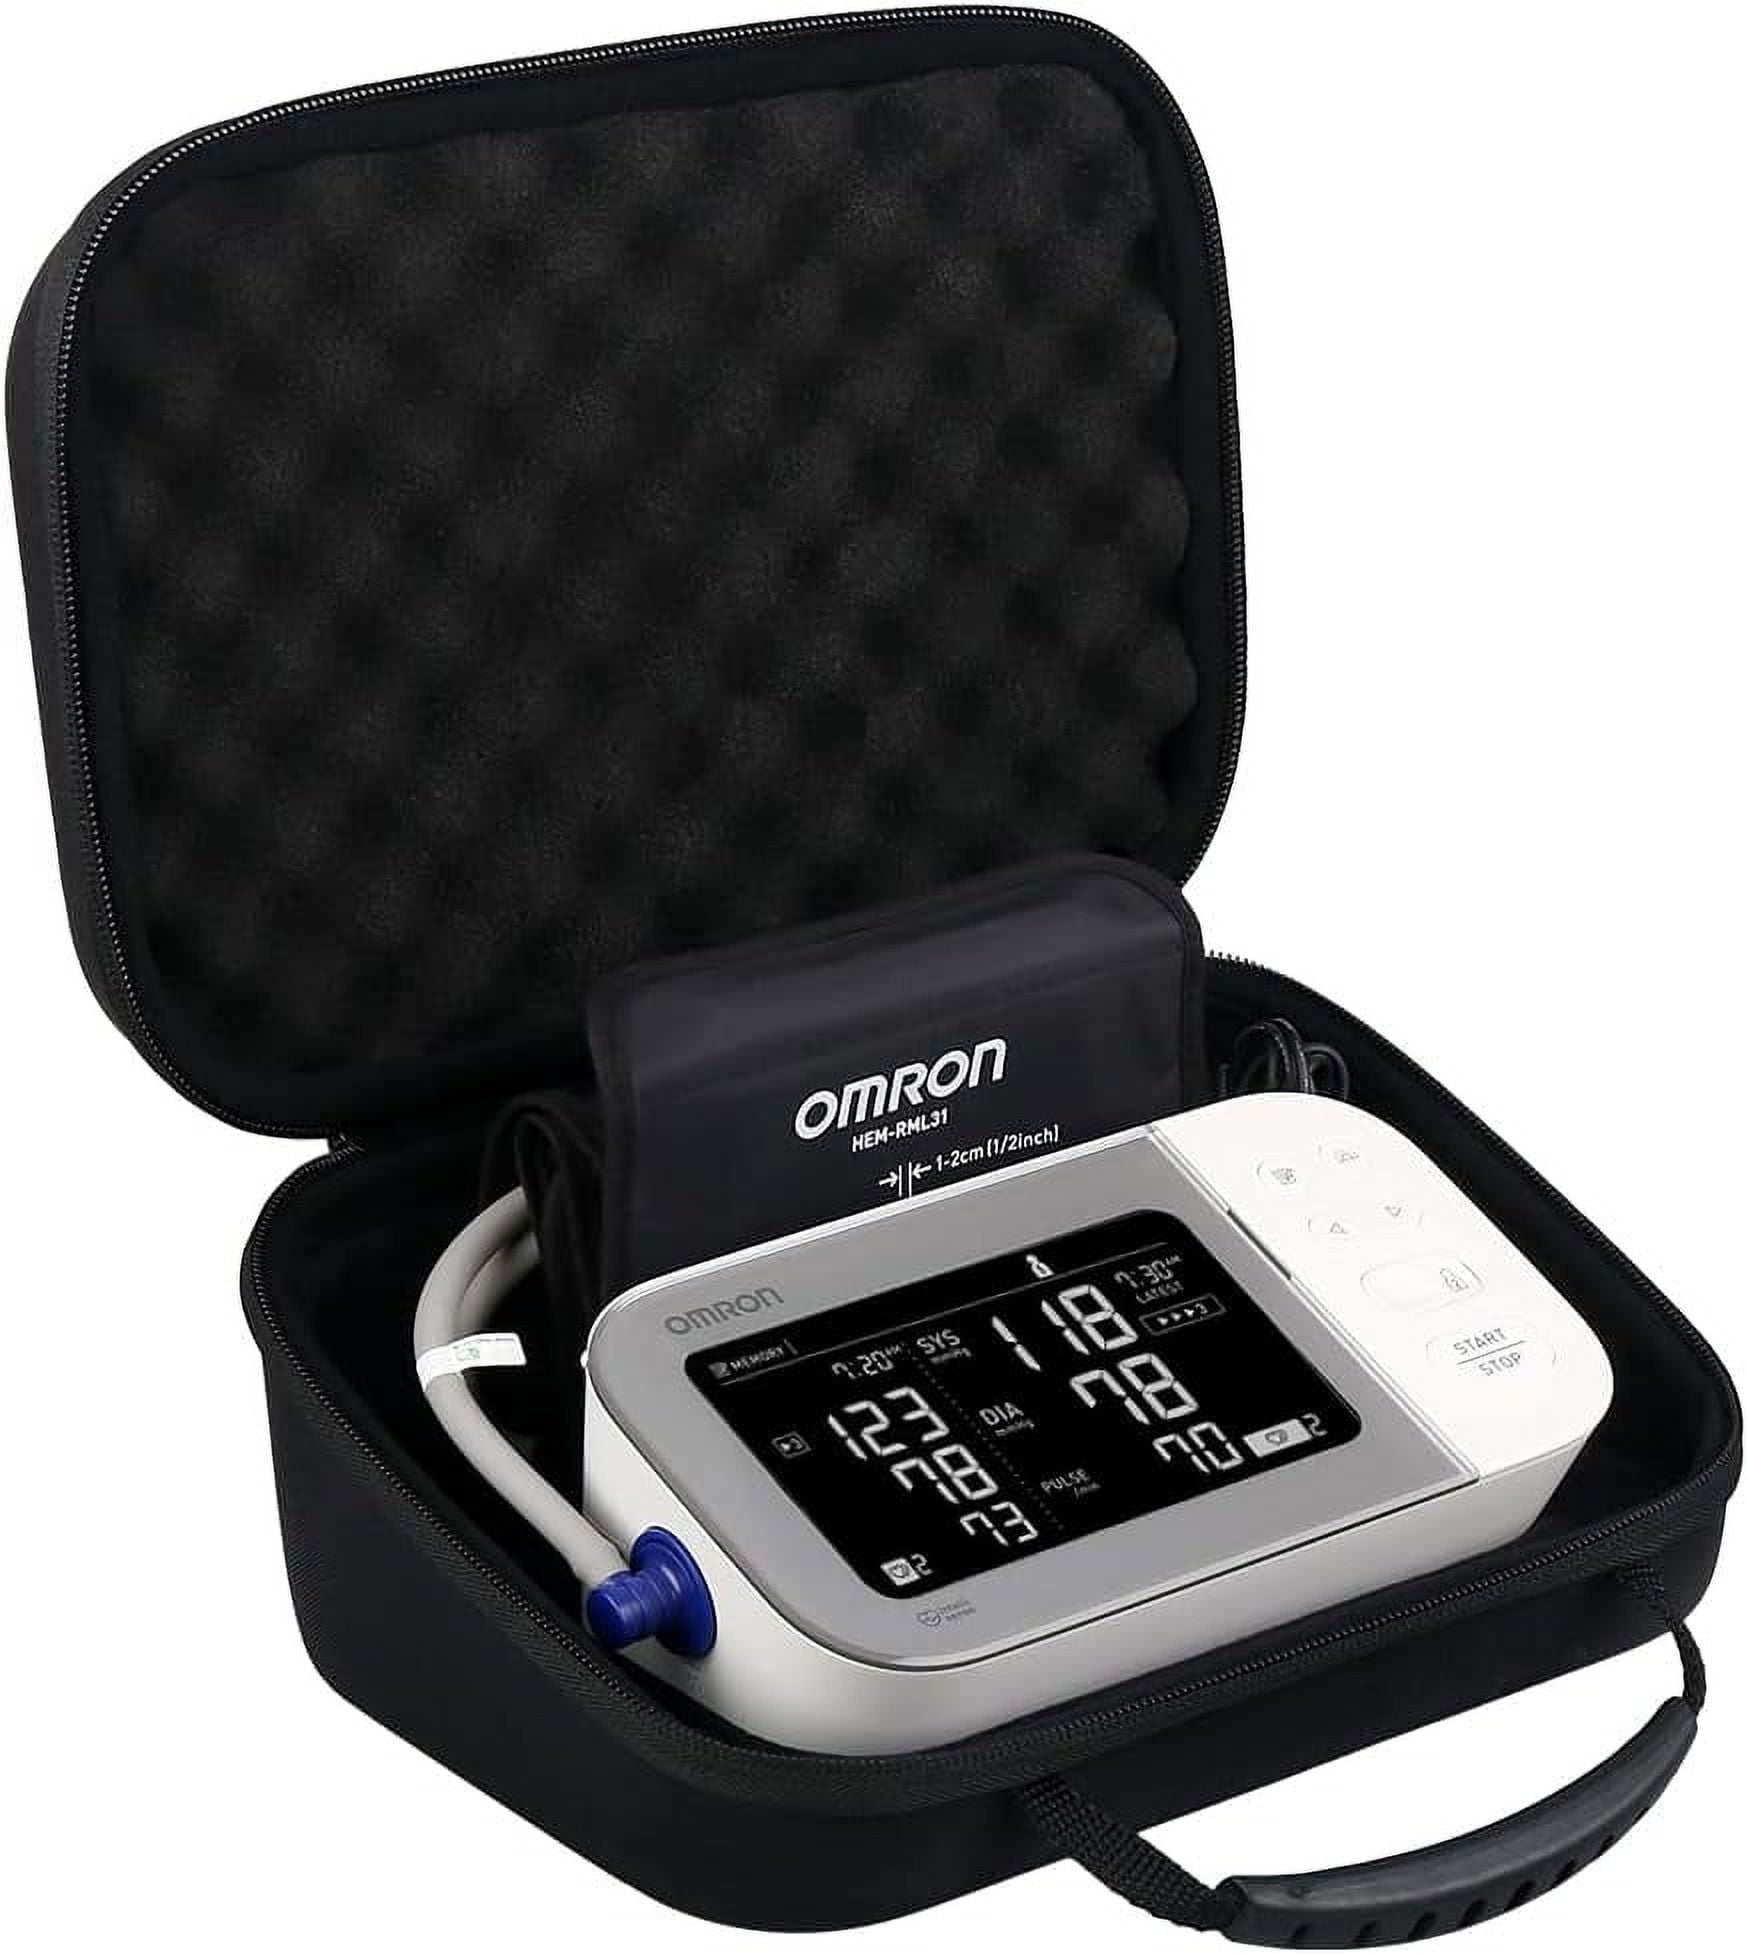 BOVKE Hard Carrying Case for OMRON Platinum BP5450 OMRON Gold BP5350 OMRON  7 Series BP7350 OMRON 10 Series BP7450 Wireless Blood Pressure Monitor,  Extra Room fits Premium Upper Arm Cuff, Black 